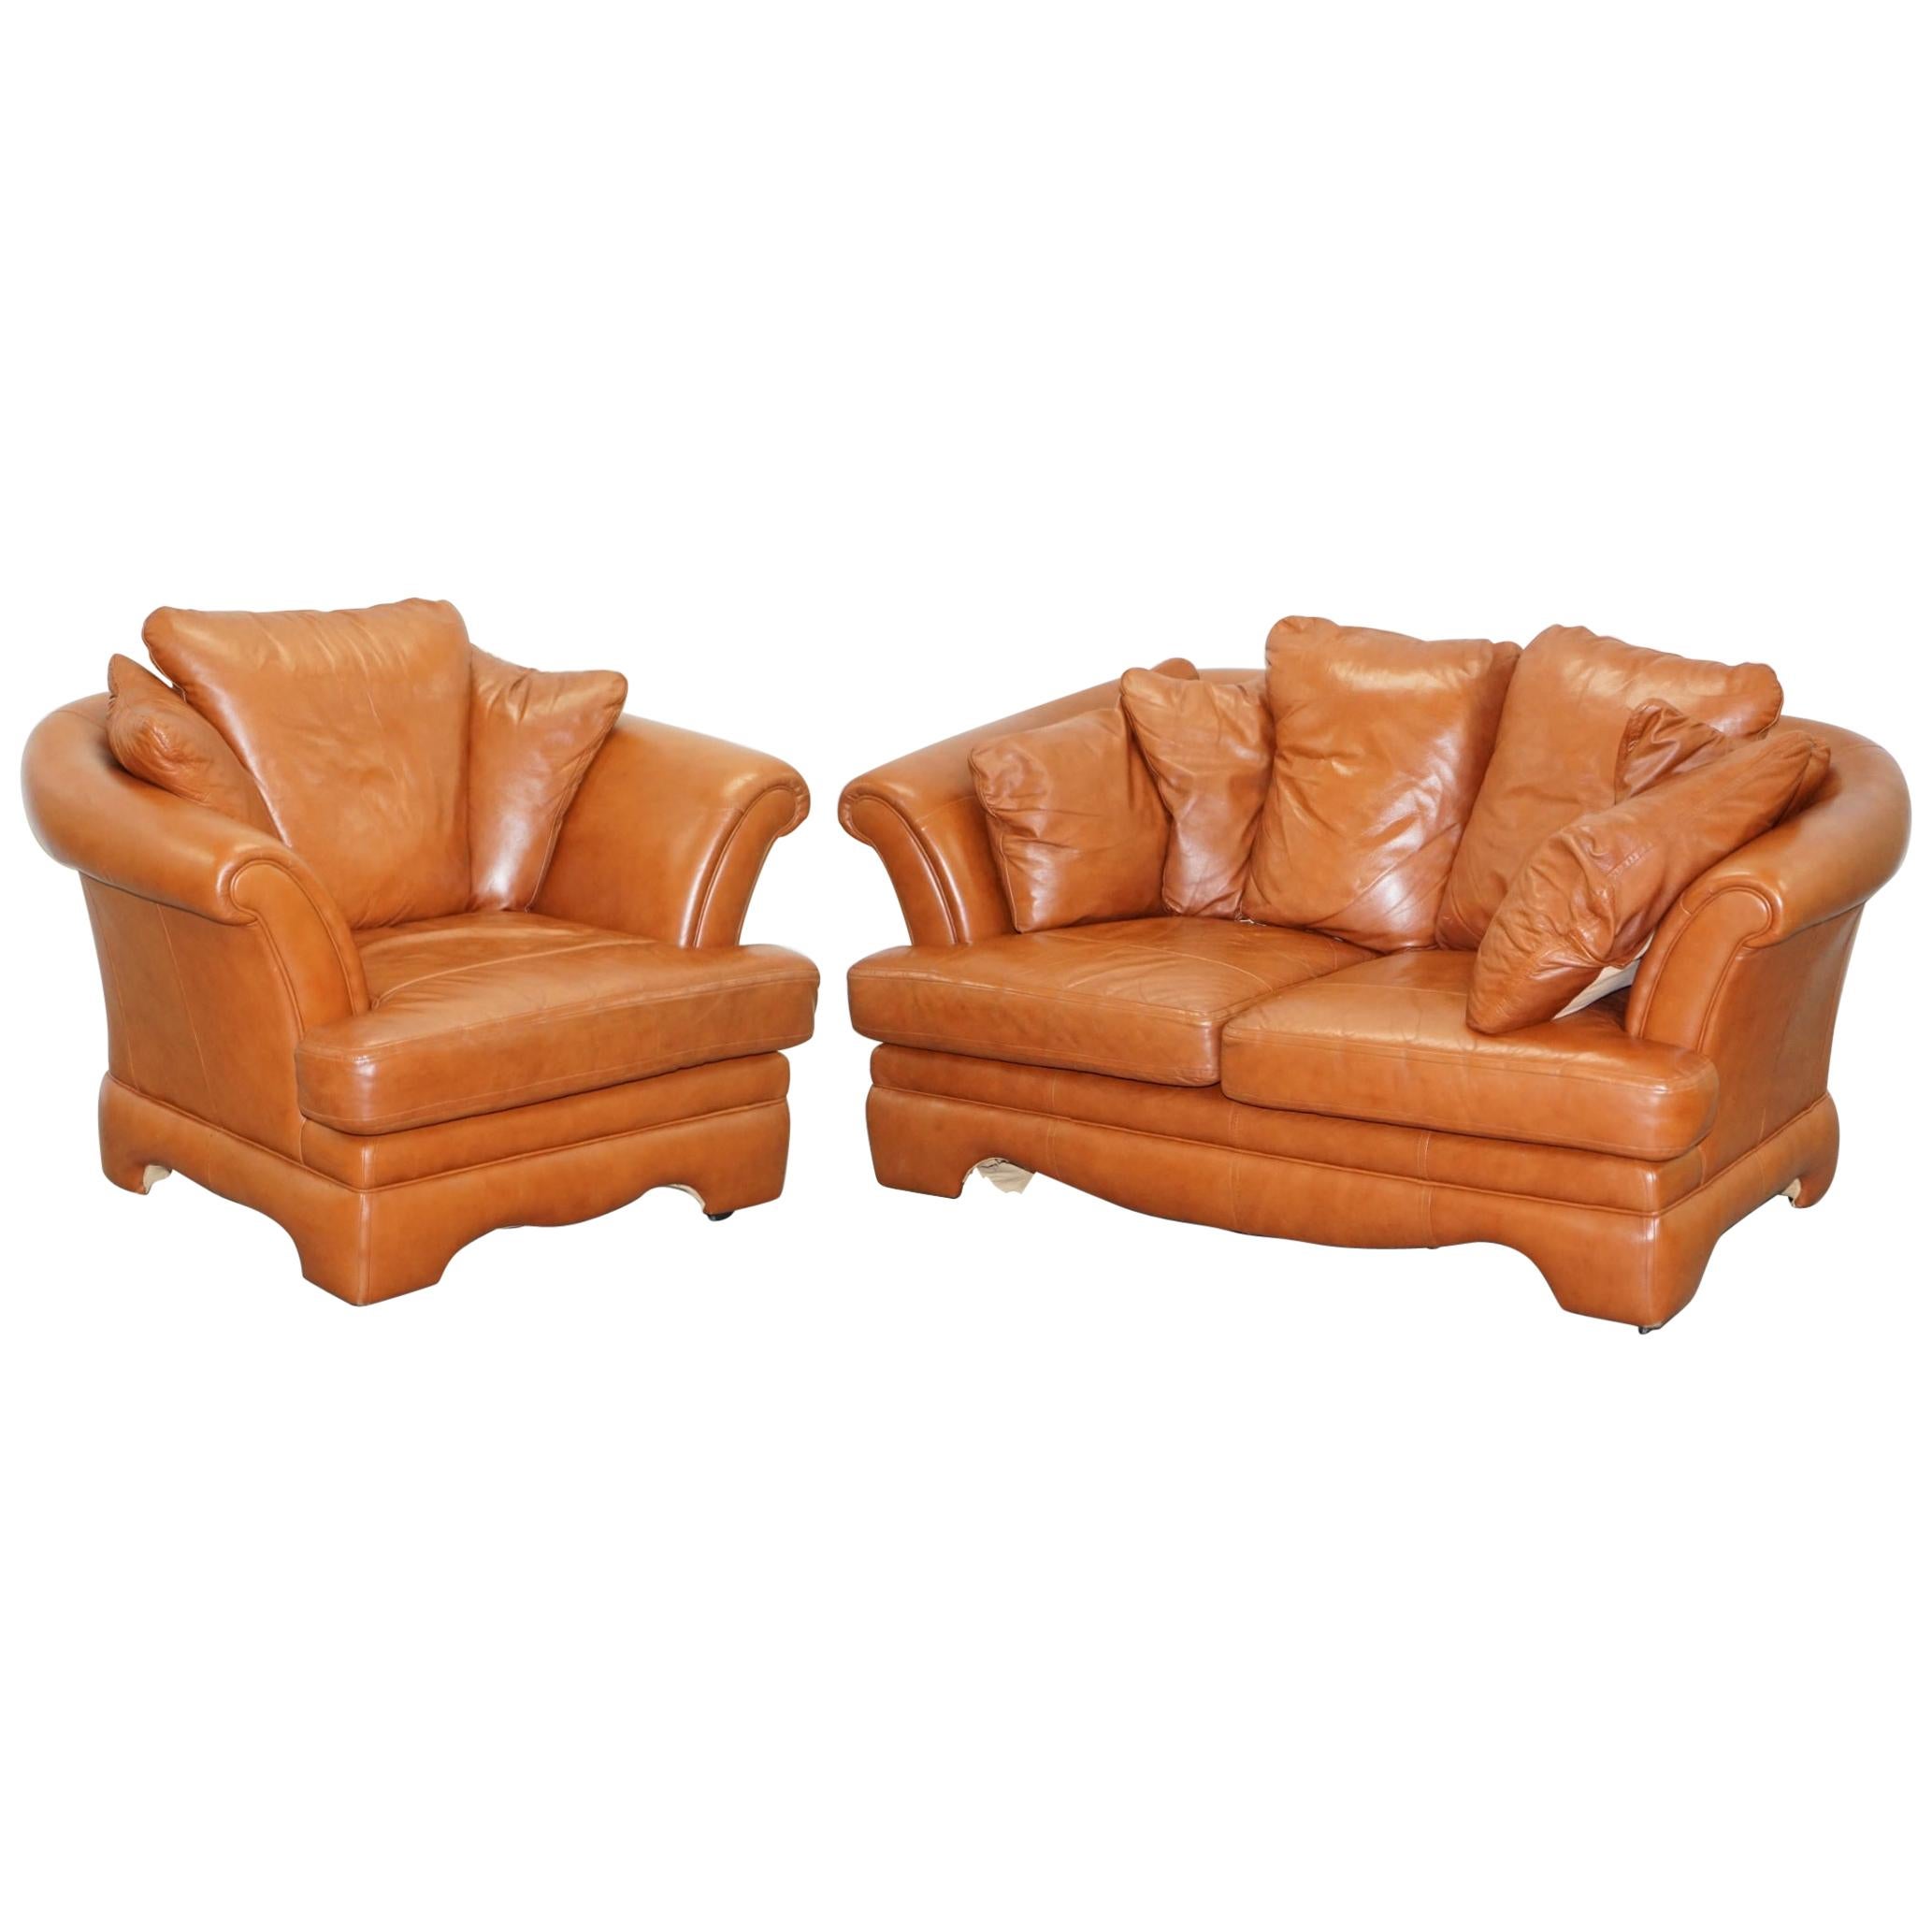 Lovely Small Aged Tan Brown Leather Sofa and Matching Armchair Two-Piece Suite